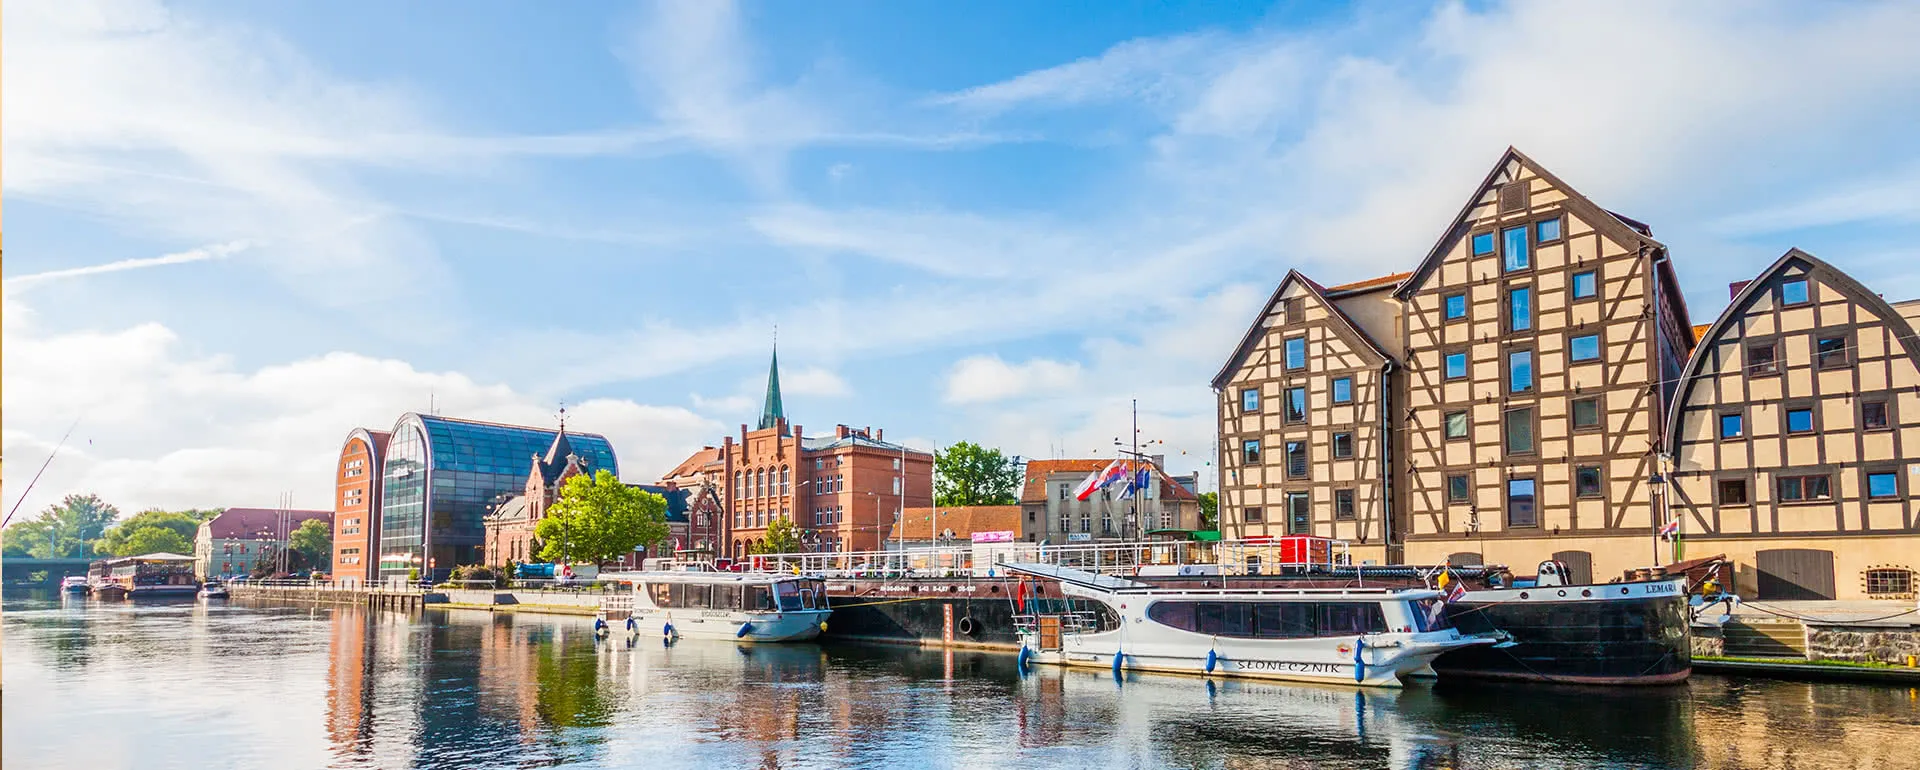 Bydgoszcz - the destination for workers